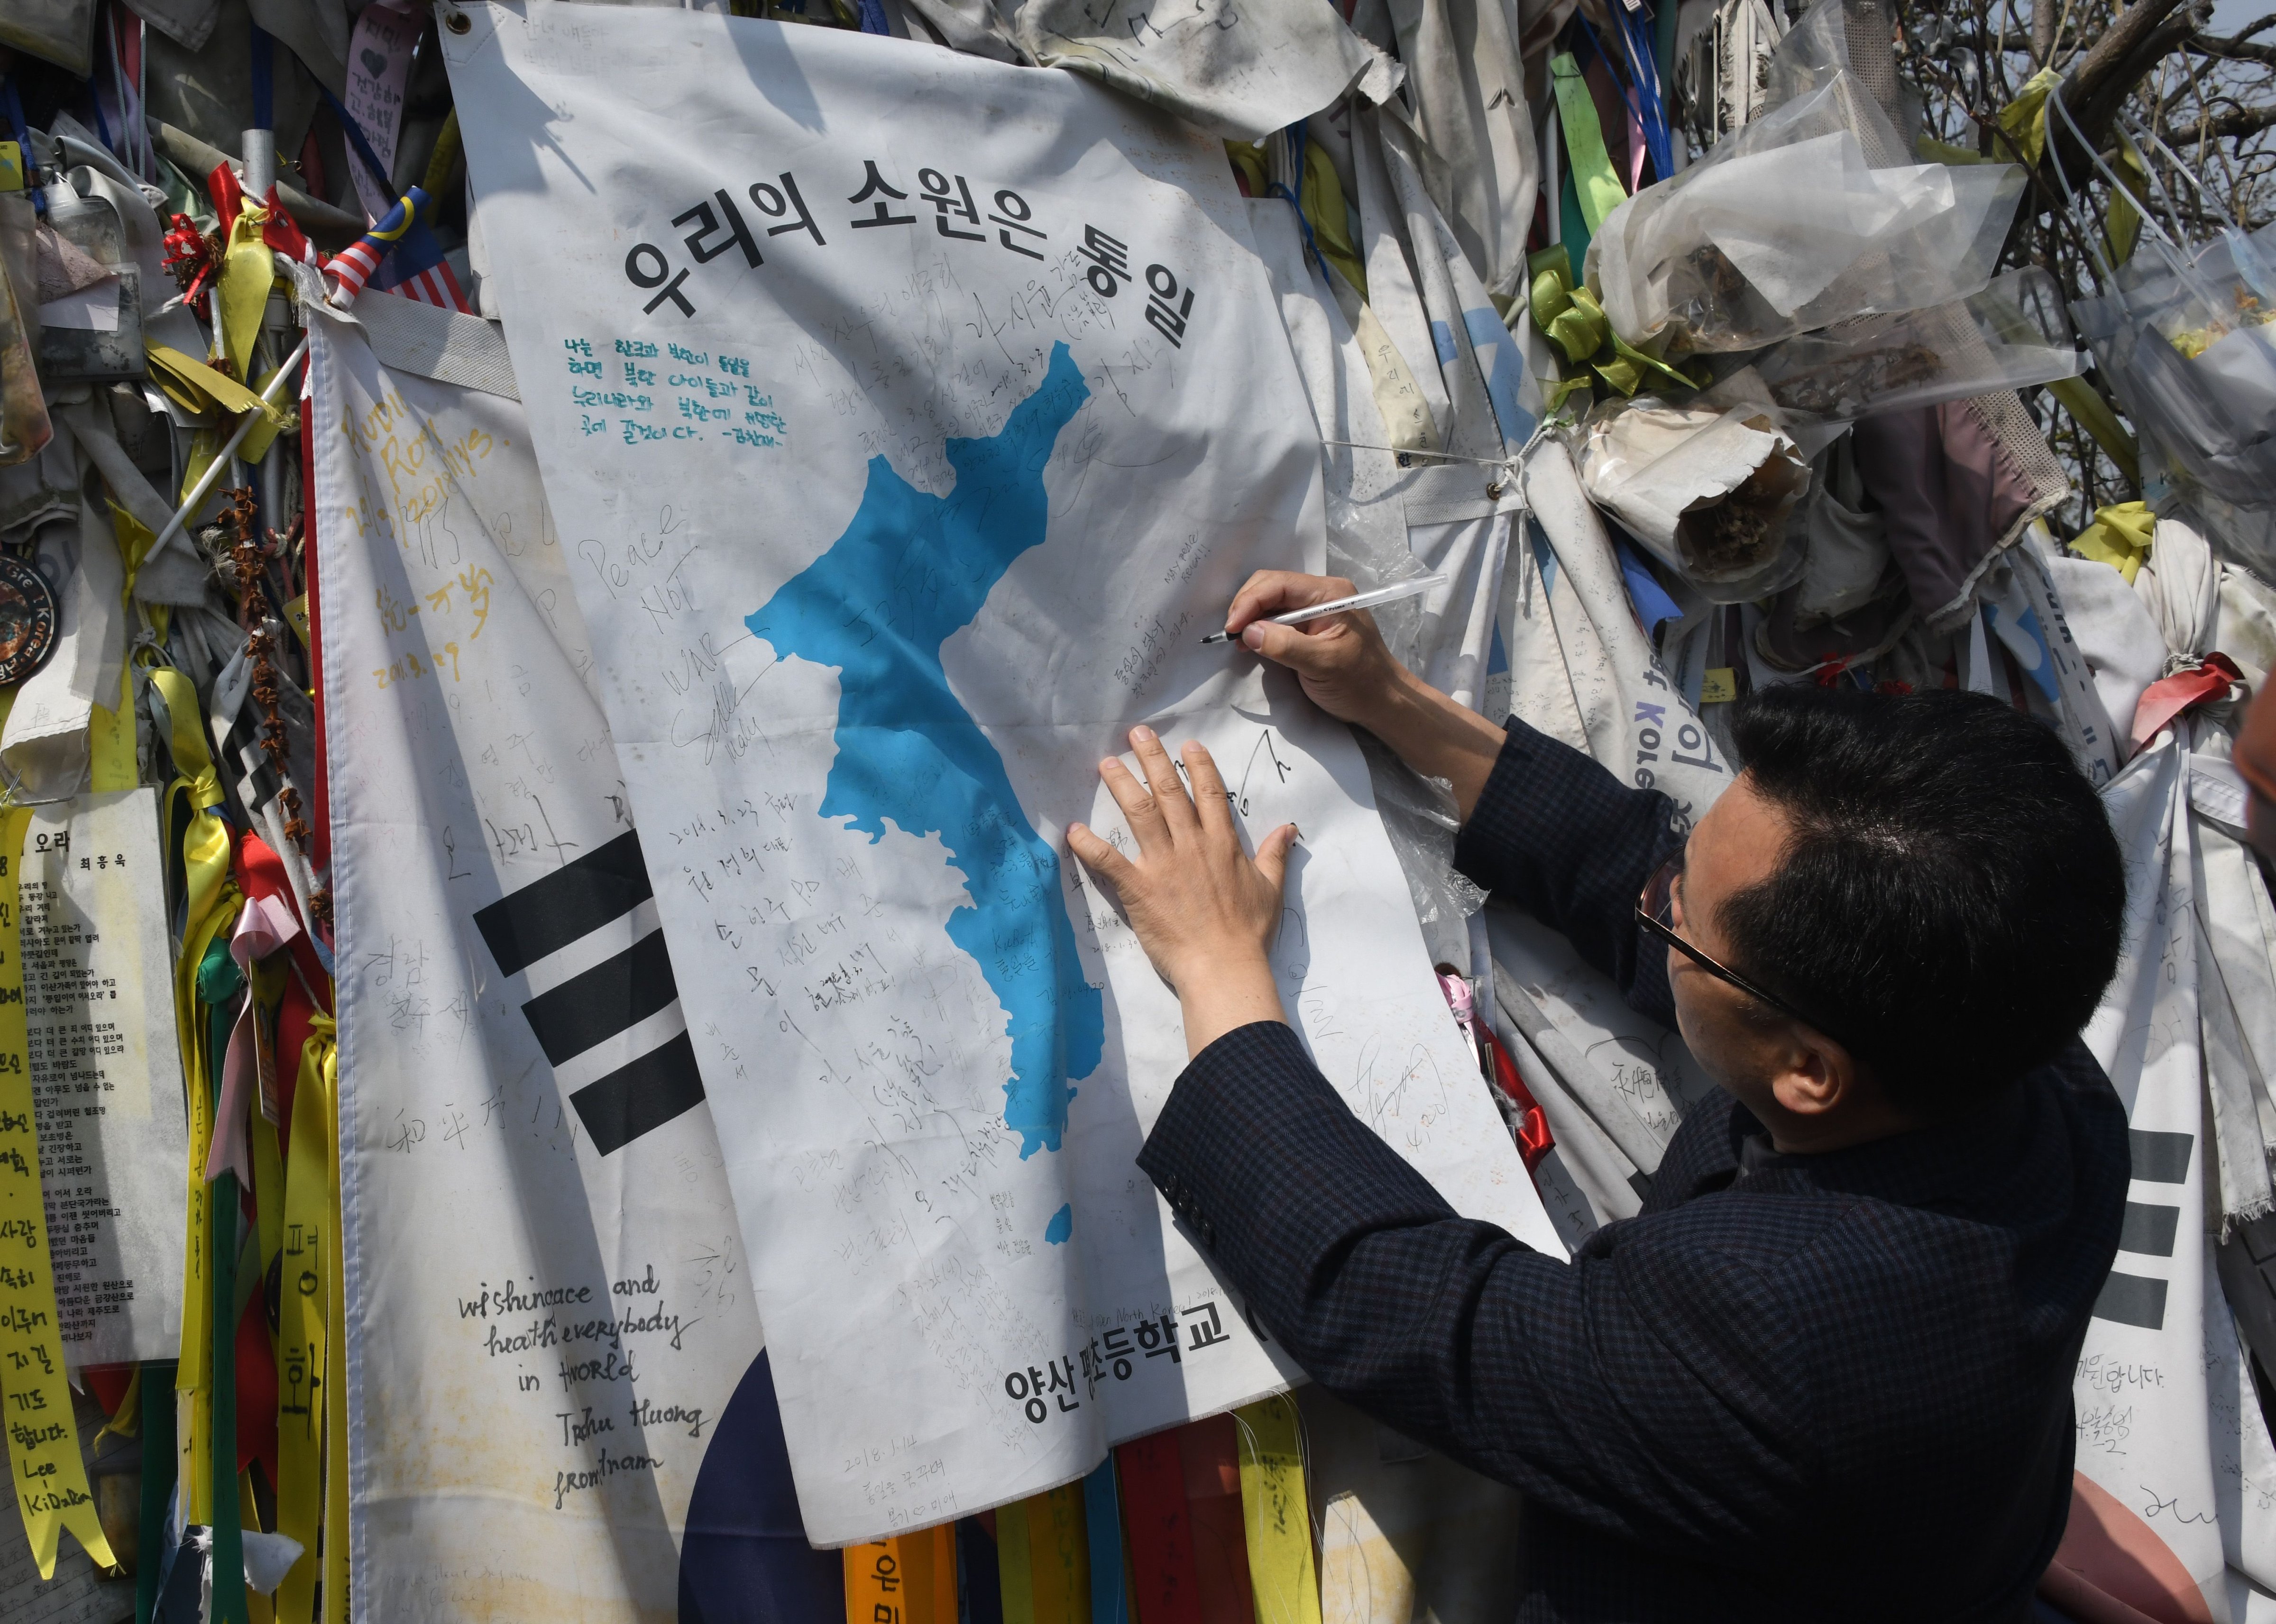 A man writes an inscription on a "Unification flag" hanging at a military fence at Imjingak peace park in Paju near the demilitarized zone dividing the two Koreas on April 26, 2018 ahead of the upcoming inter-Korea summit. (Jung Yeon-Je—AFP/Getty Images)